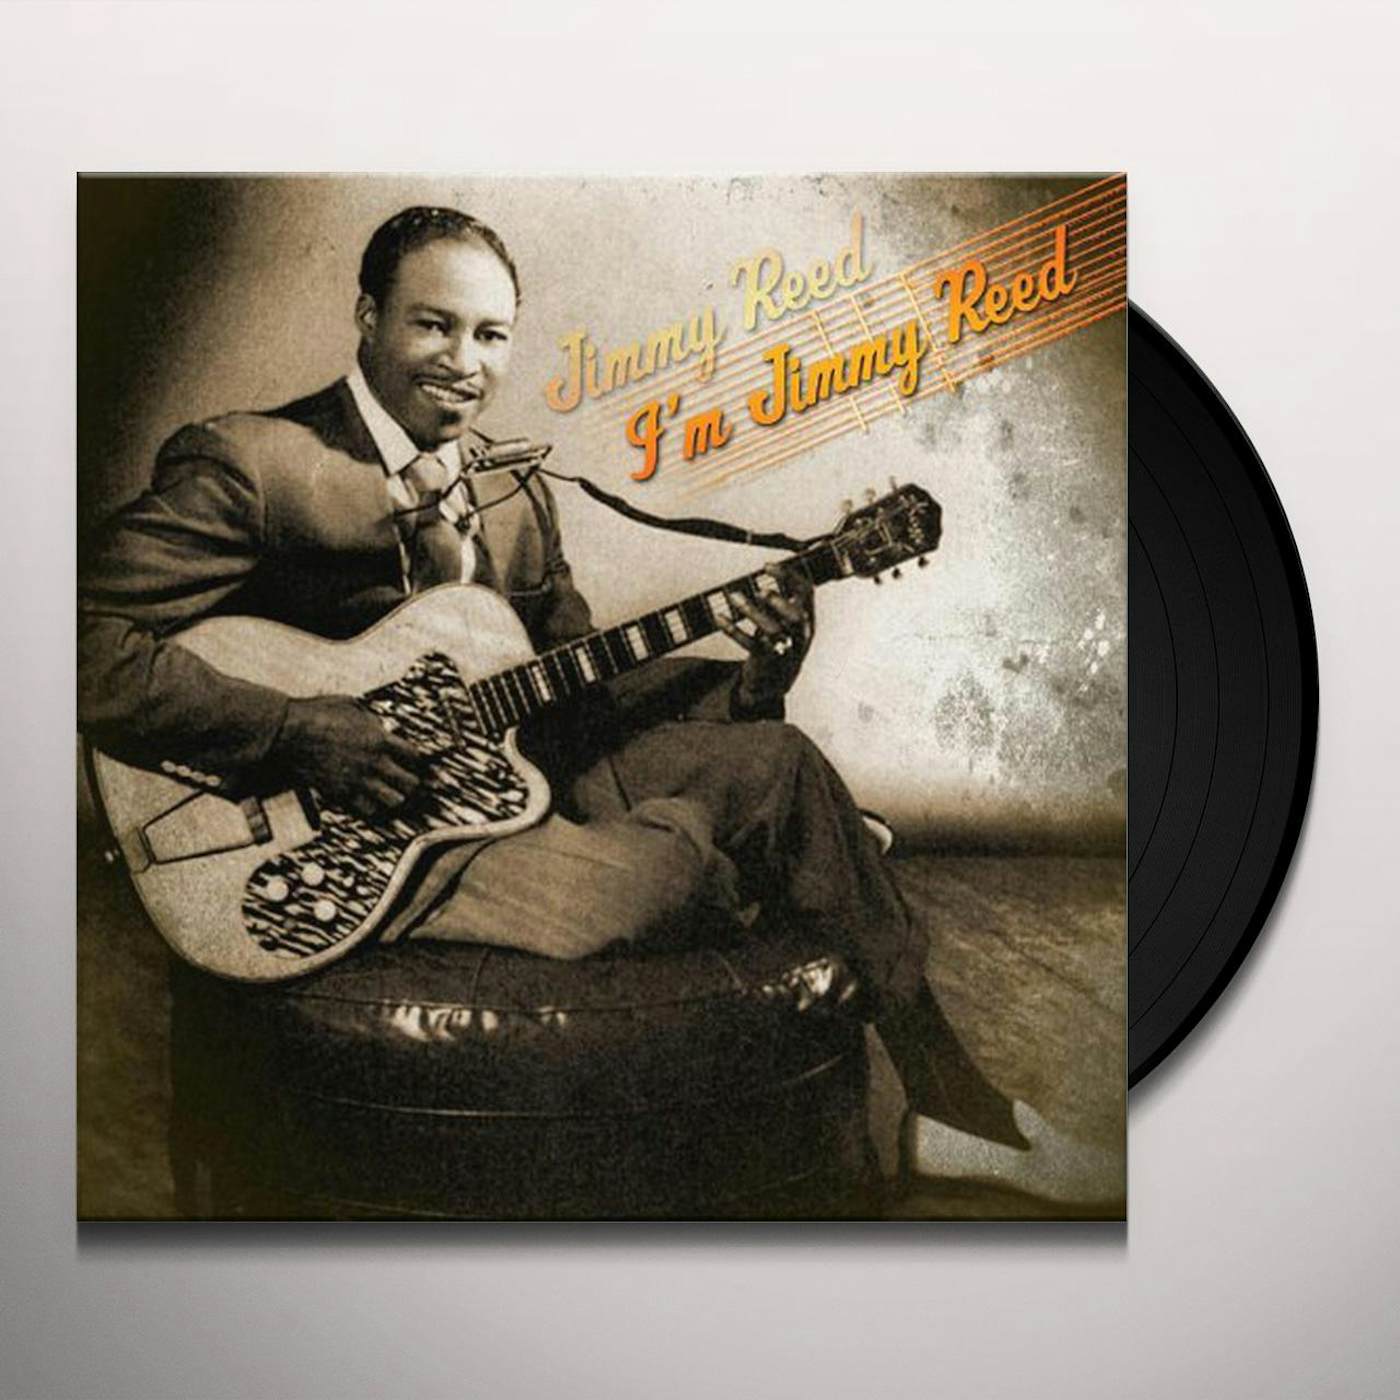 I'M JIMMY REED / ROCKIN WITH REED Vinyl Record